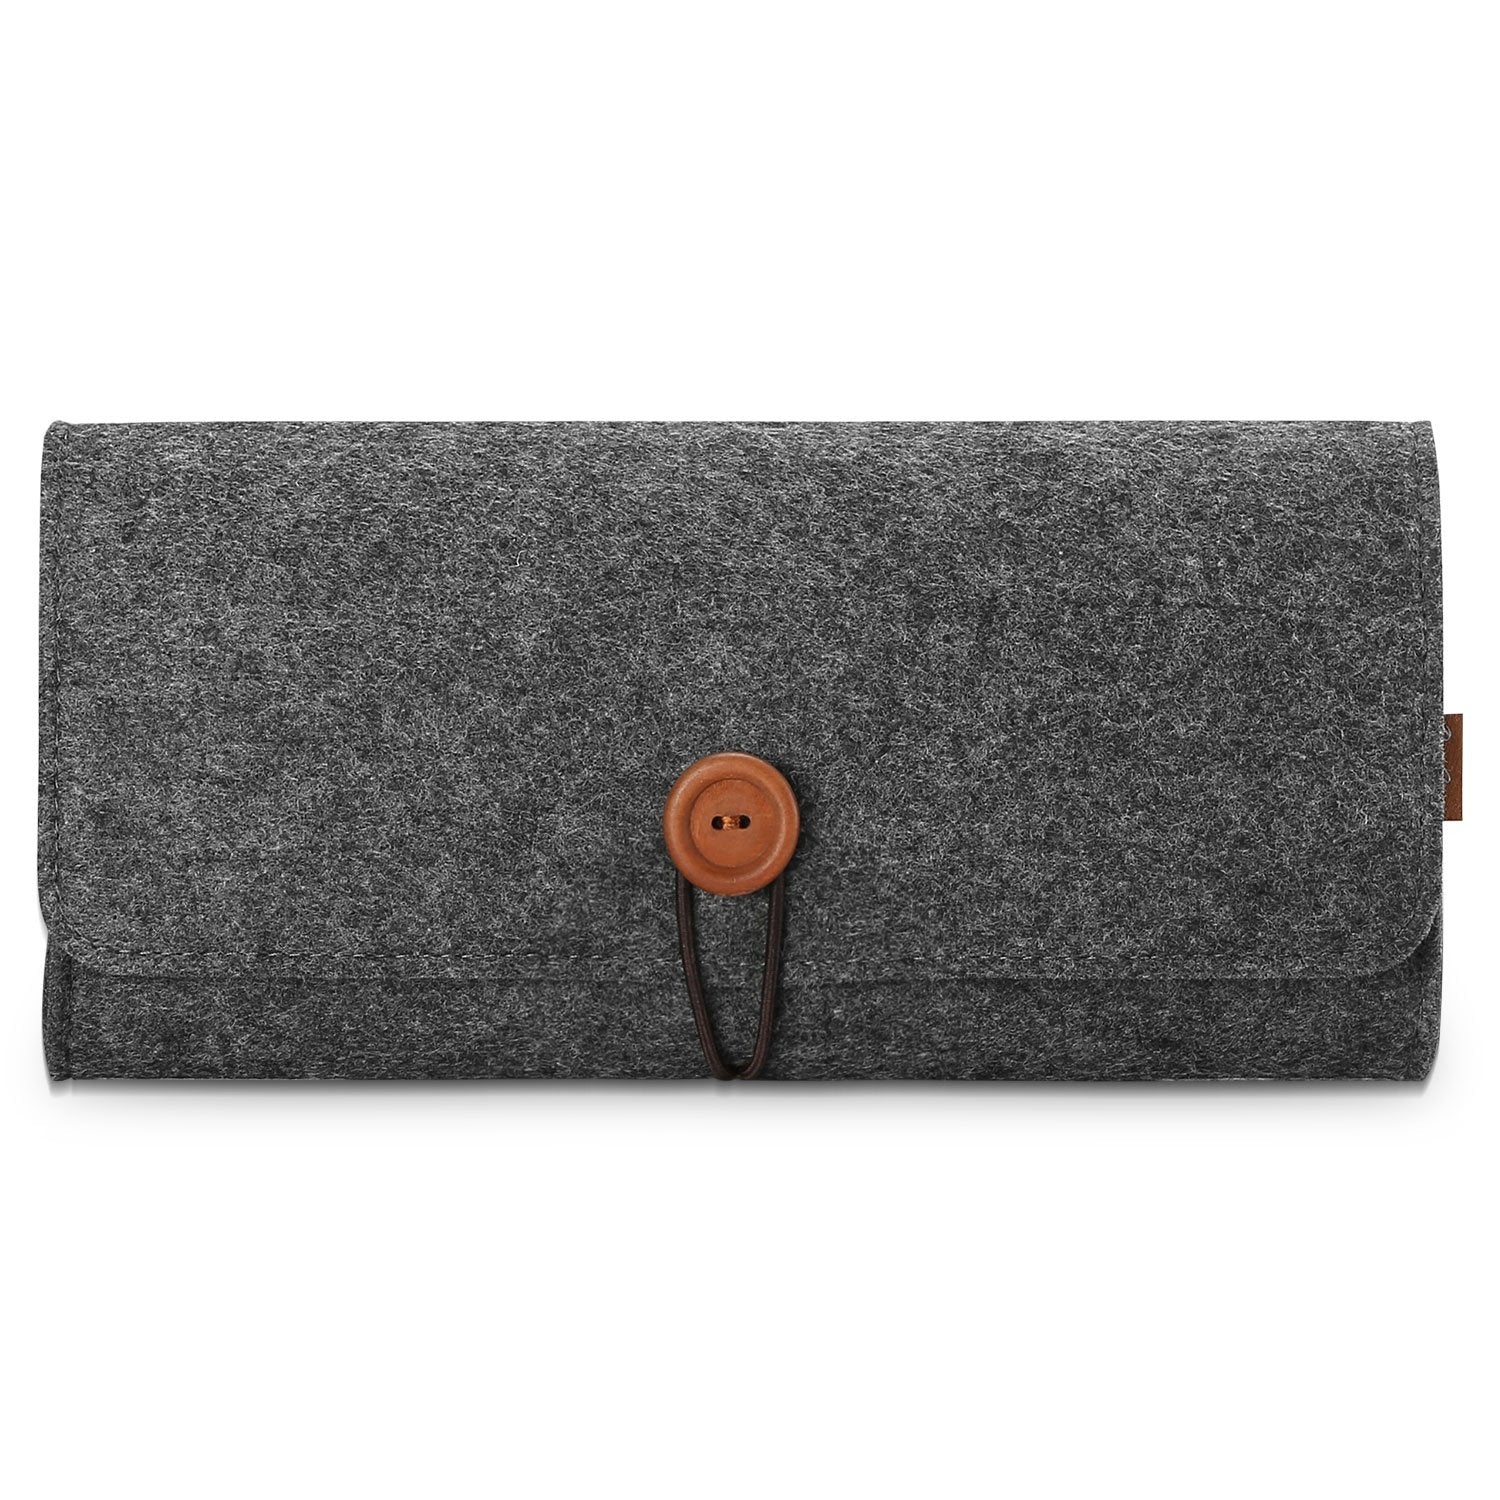 Carrying Case for Nintendo Switch Lite